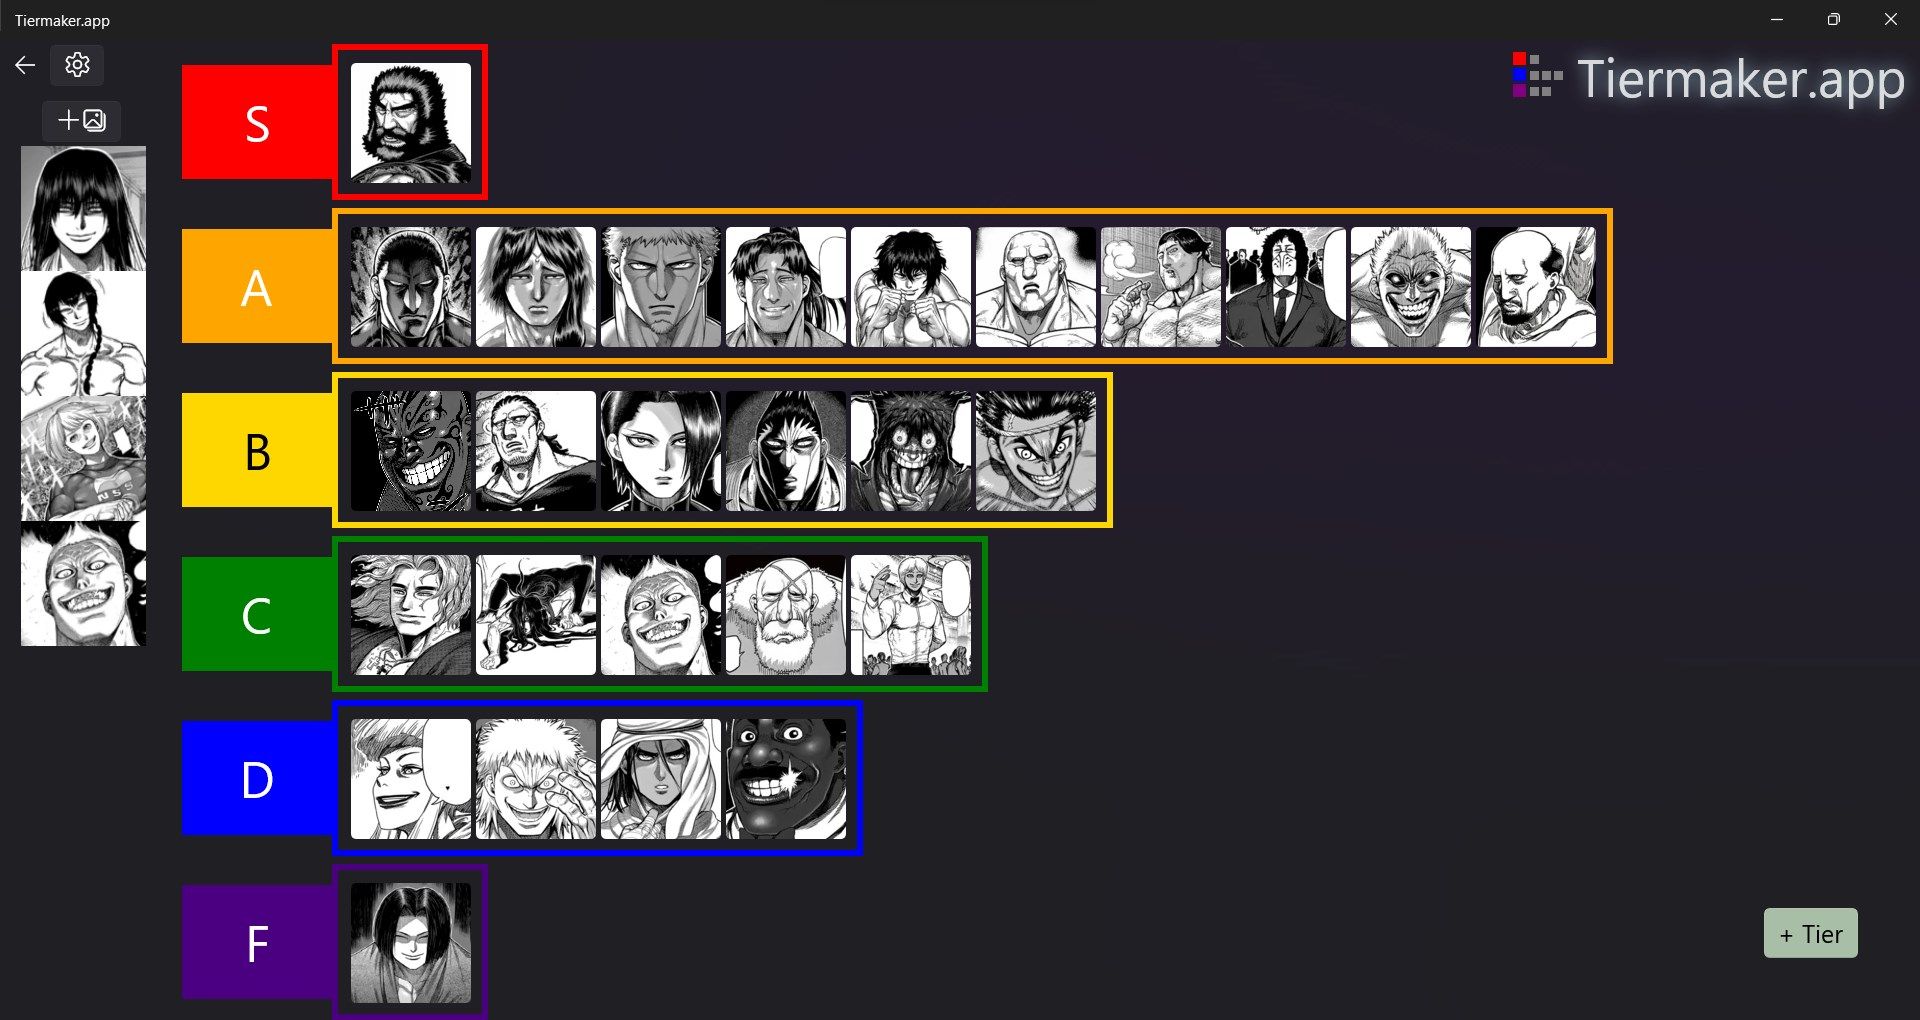 Every tierlist has its own size, which you can adjust.